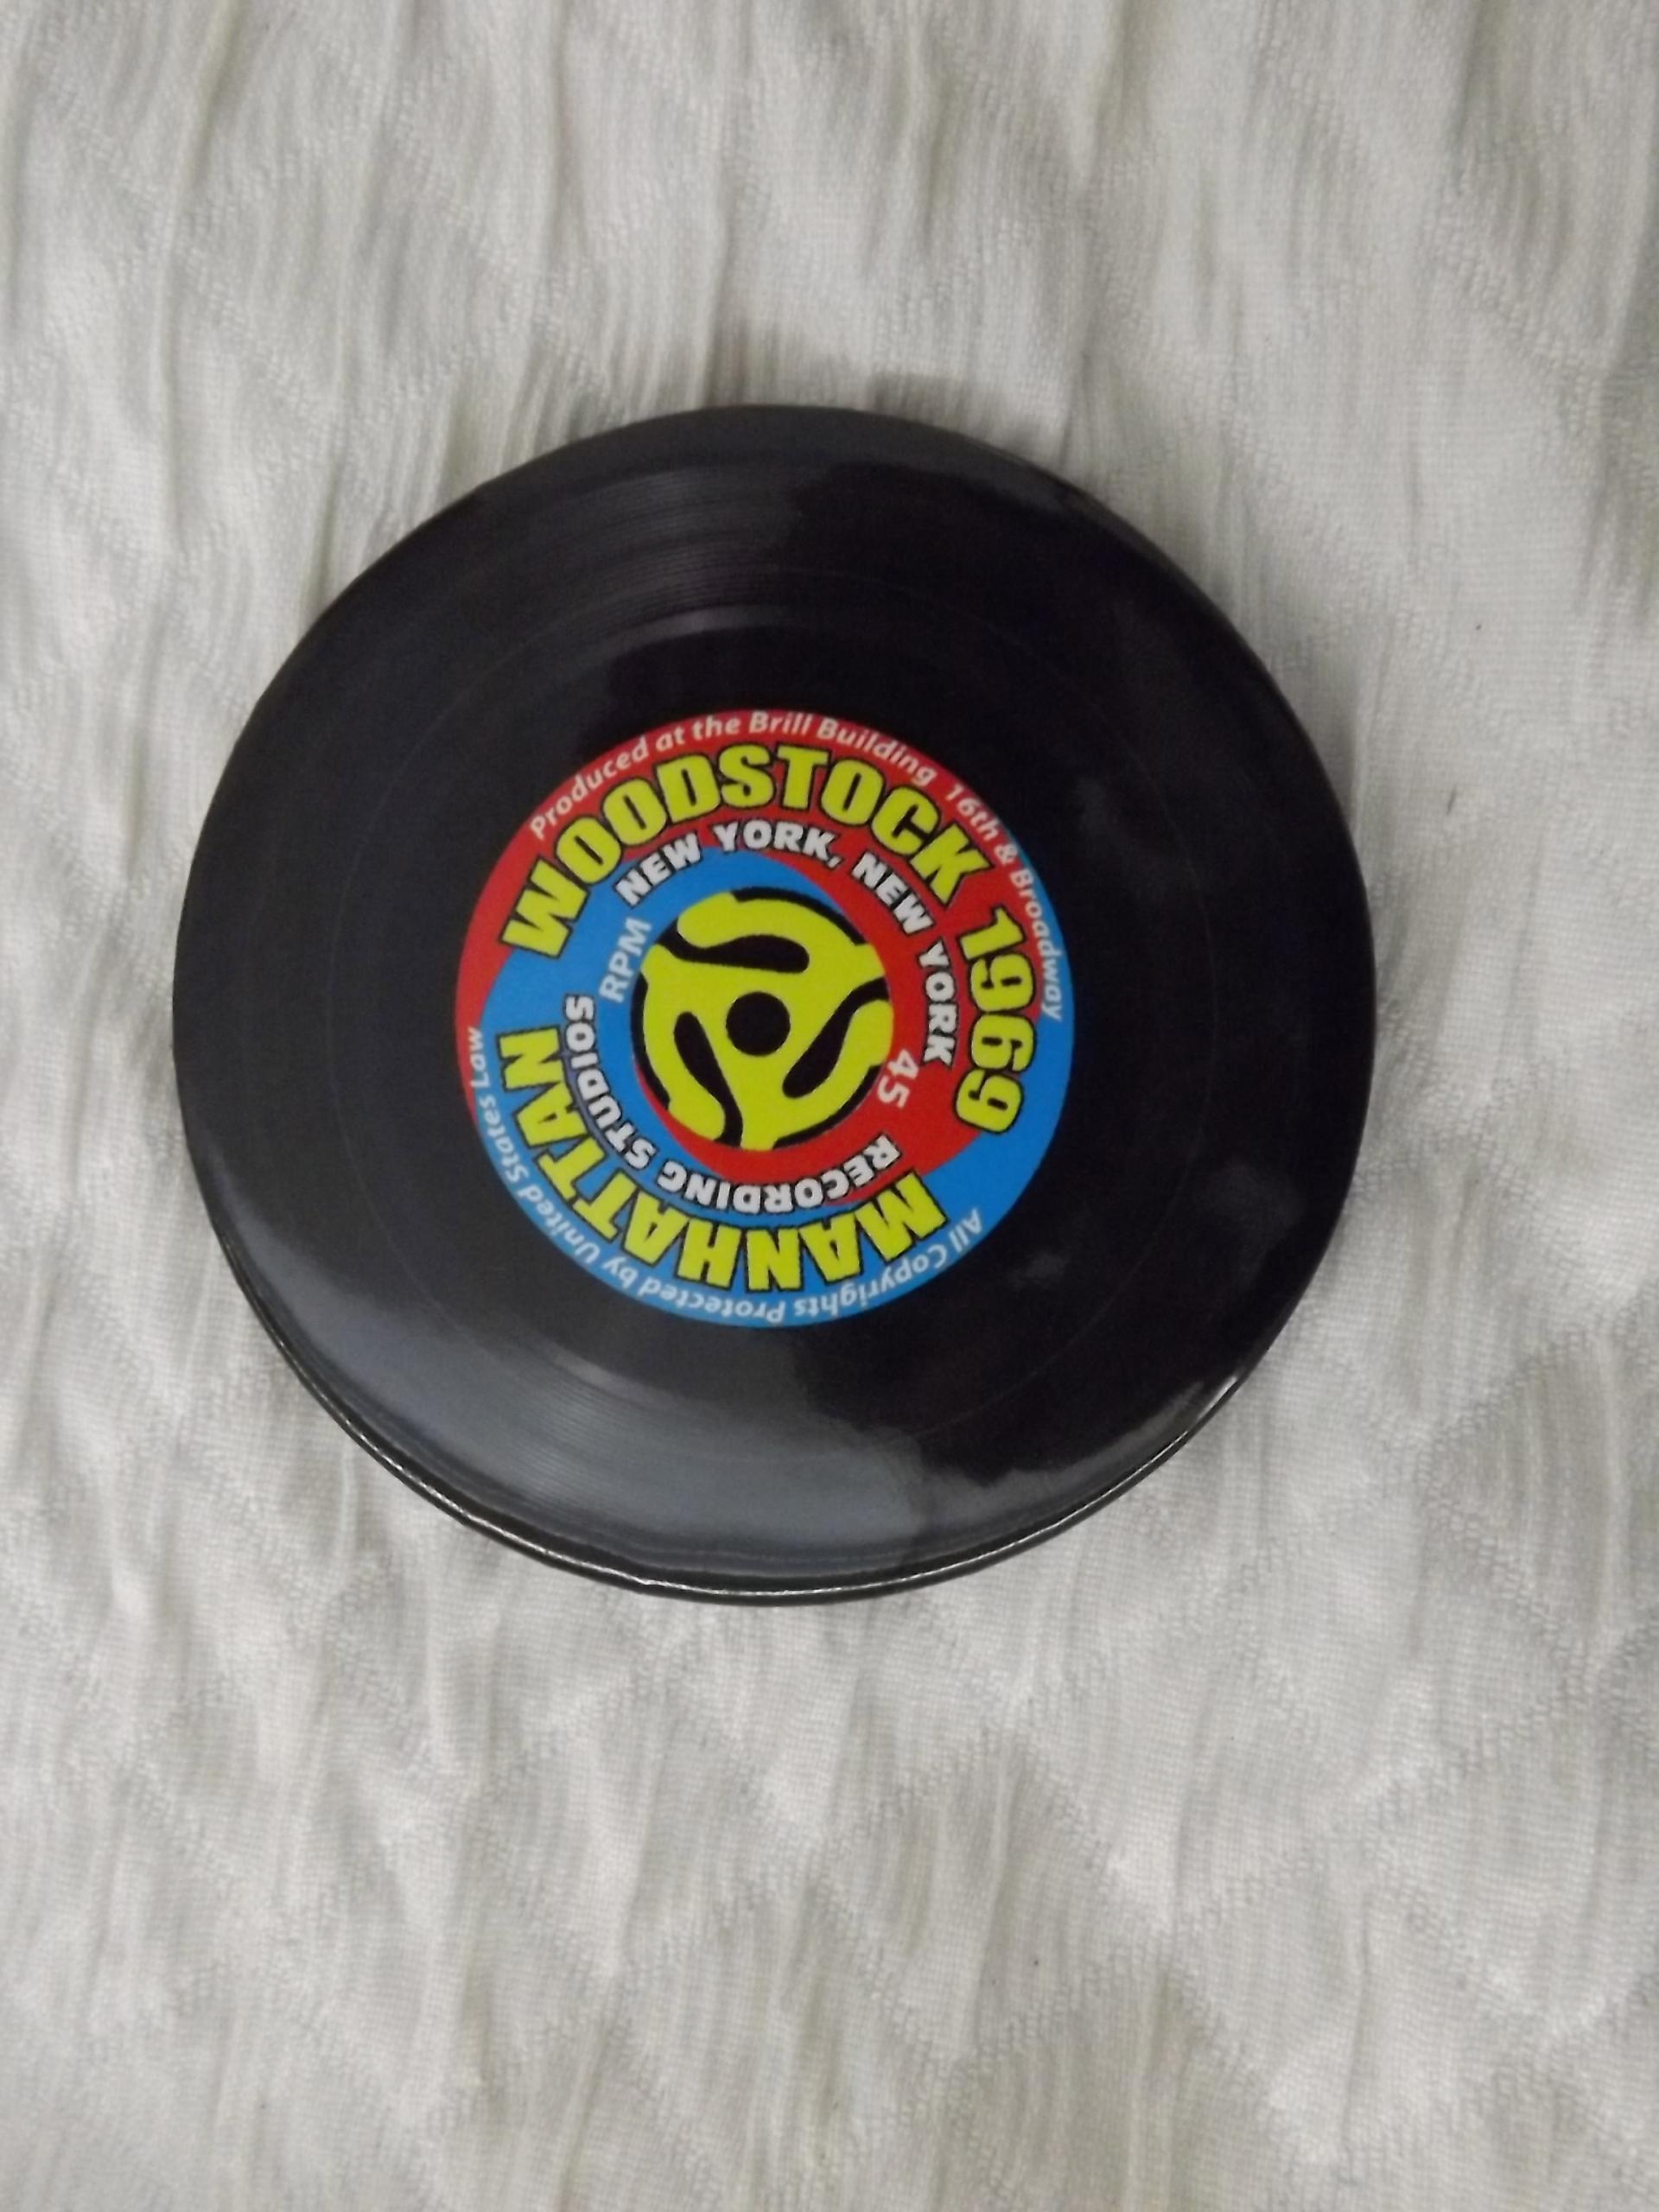 Vintage Record Magnets